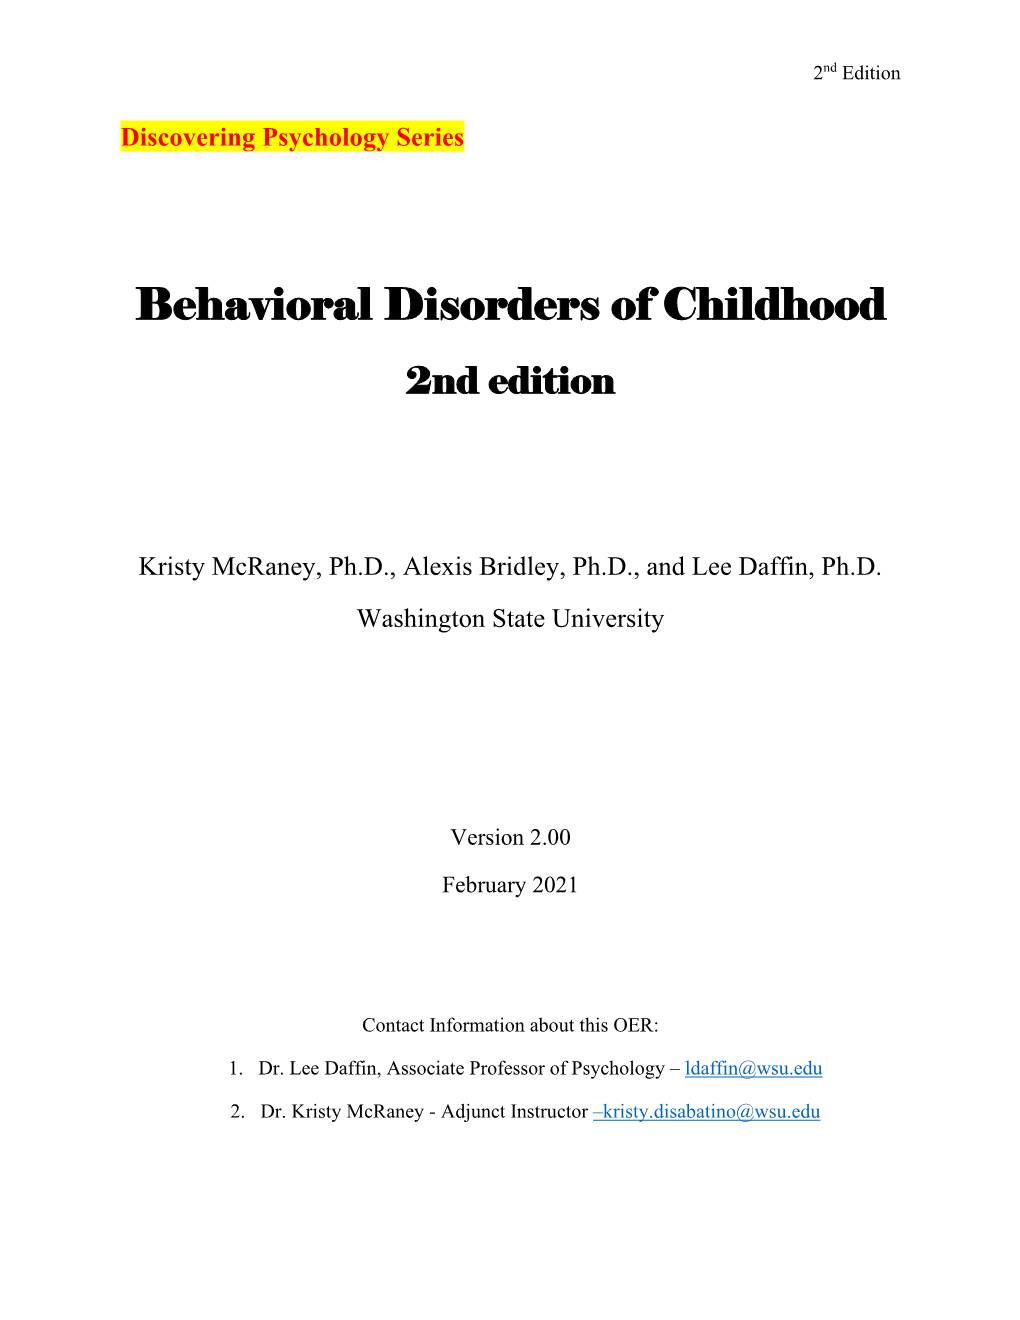 Behavioral Disorders of Childhood 2Nd Edition